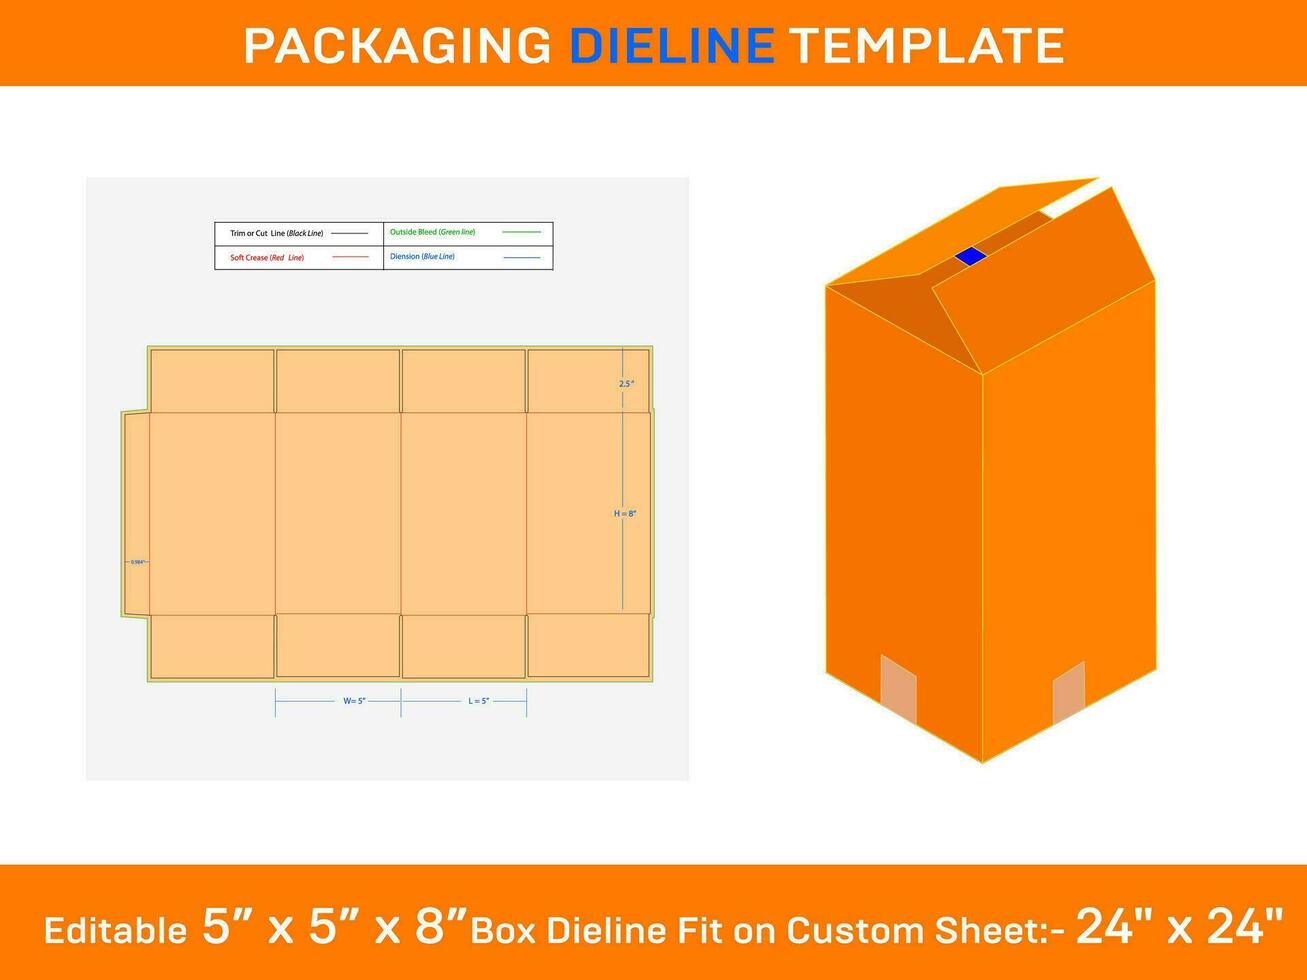 5x5x8 inch Regular Slotted Container RSC Box, Dieline Template vector